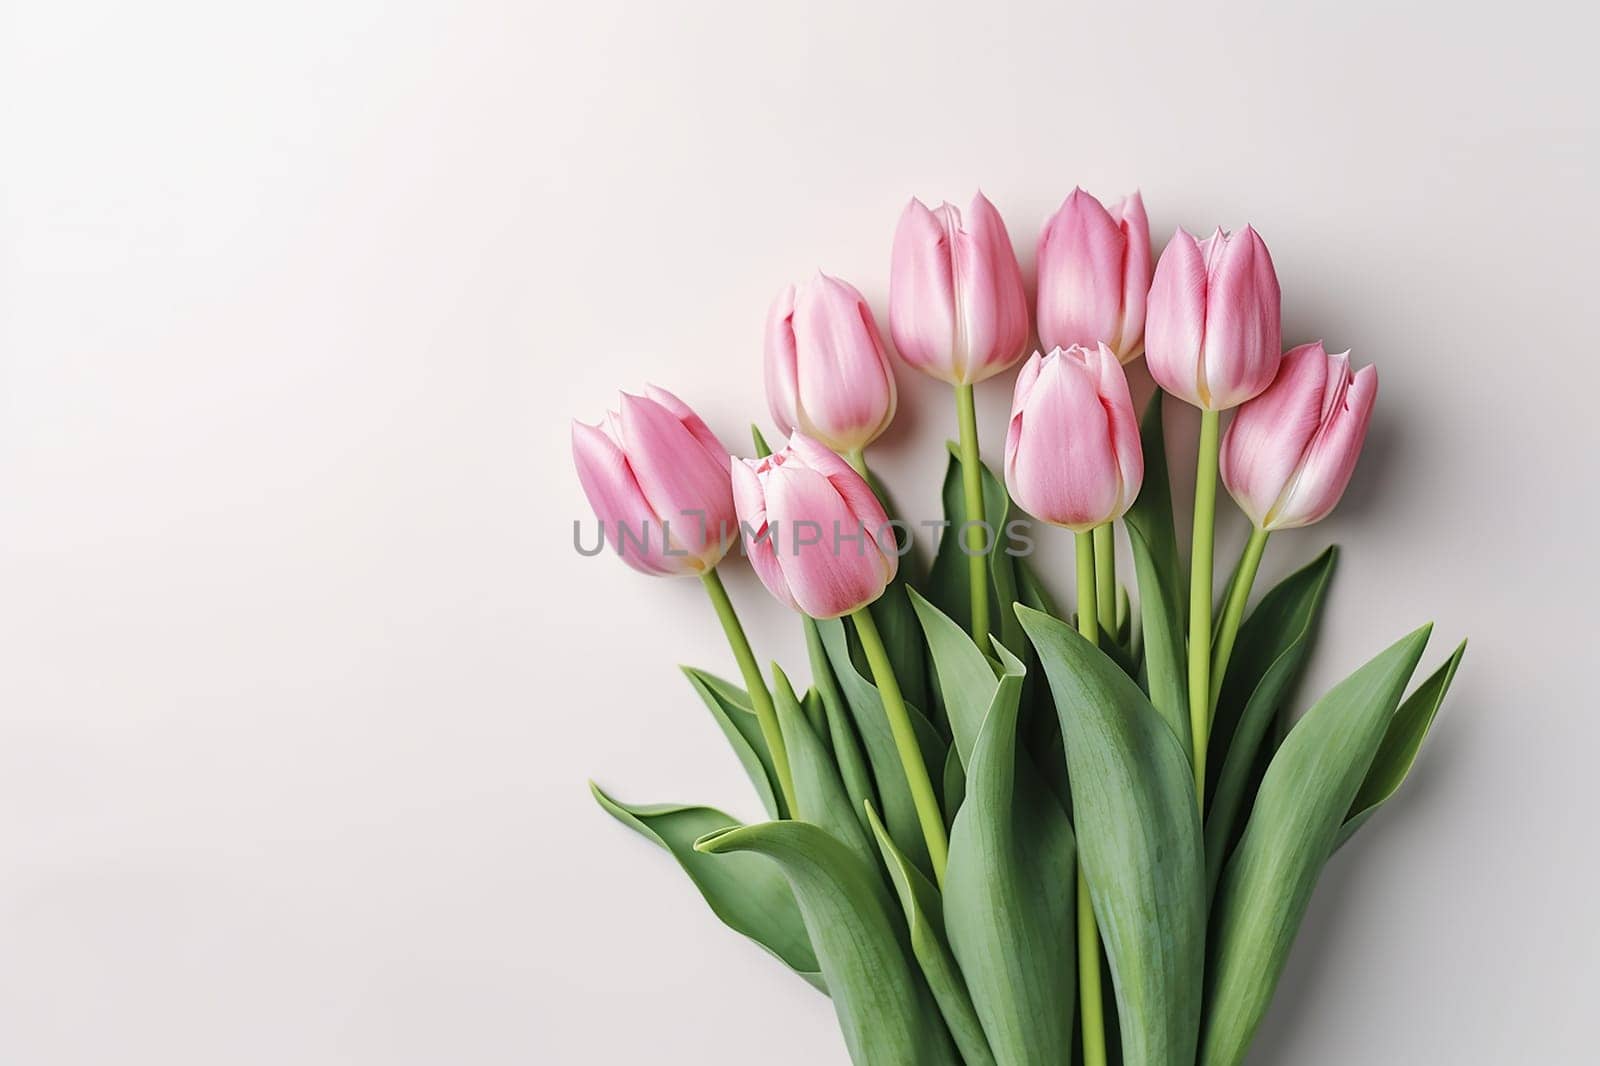 A bouquet of pink tulips against a plain background. by Hype2art